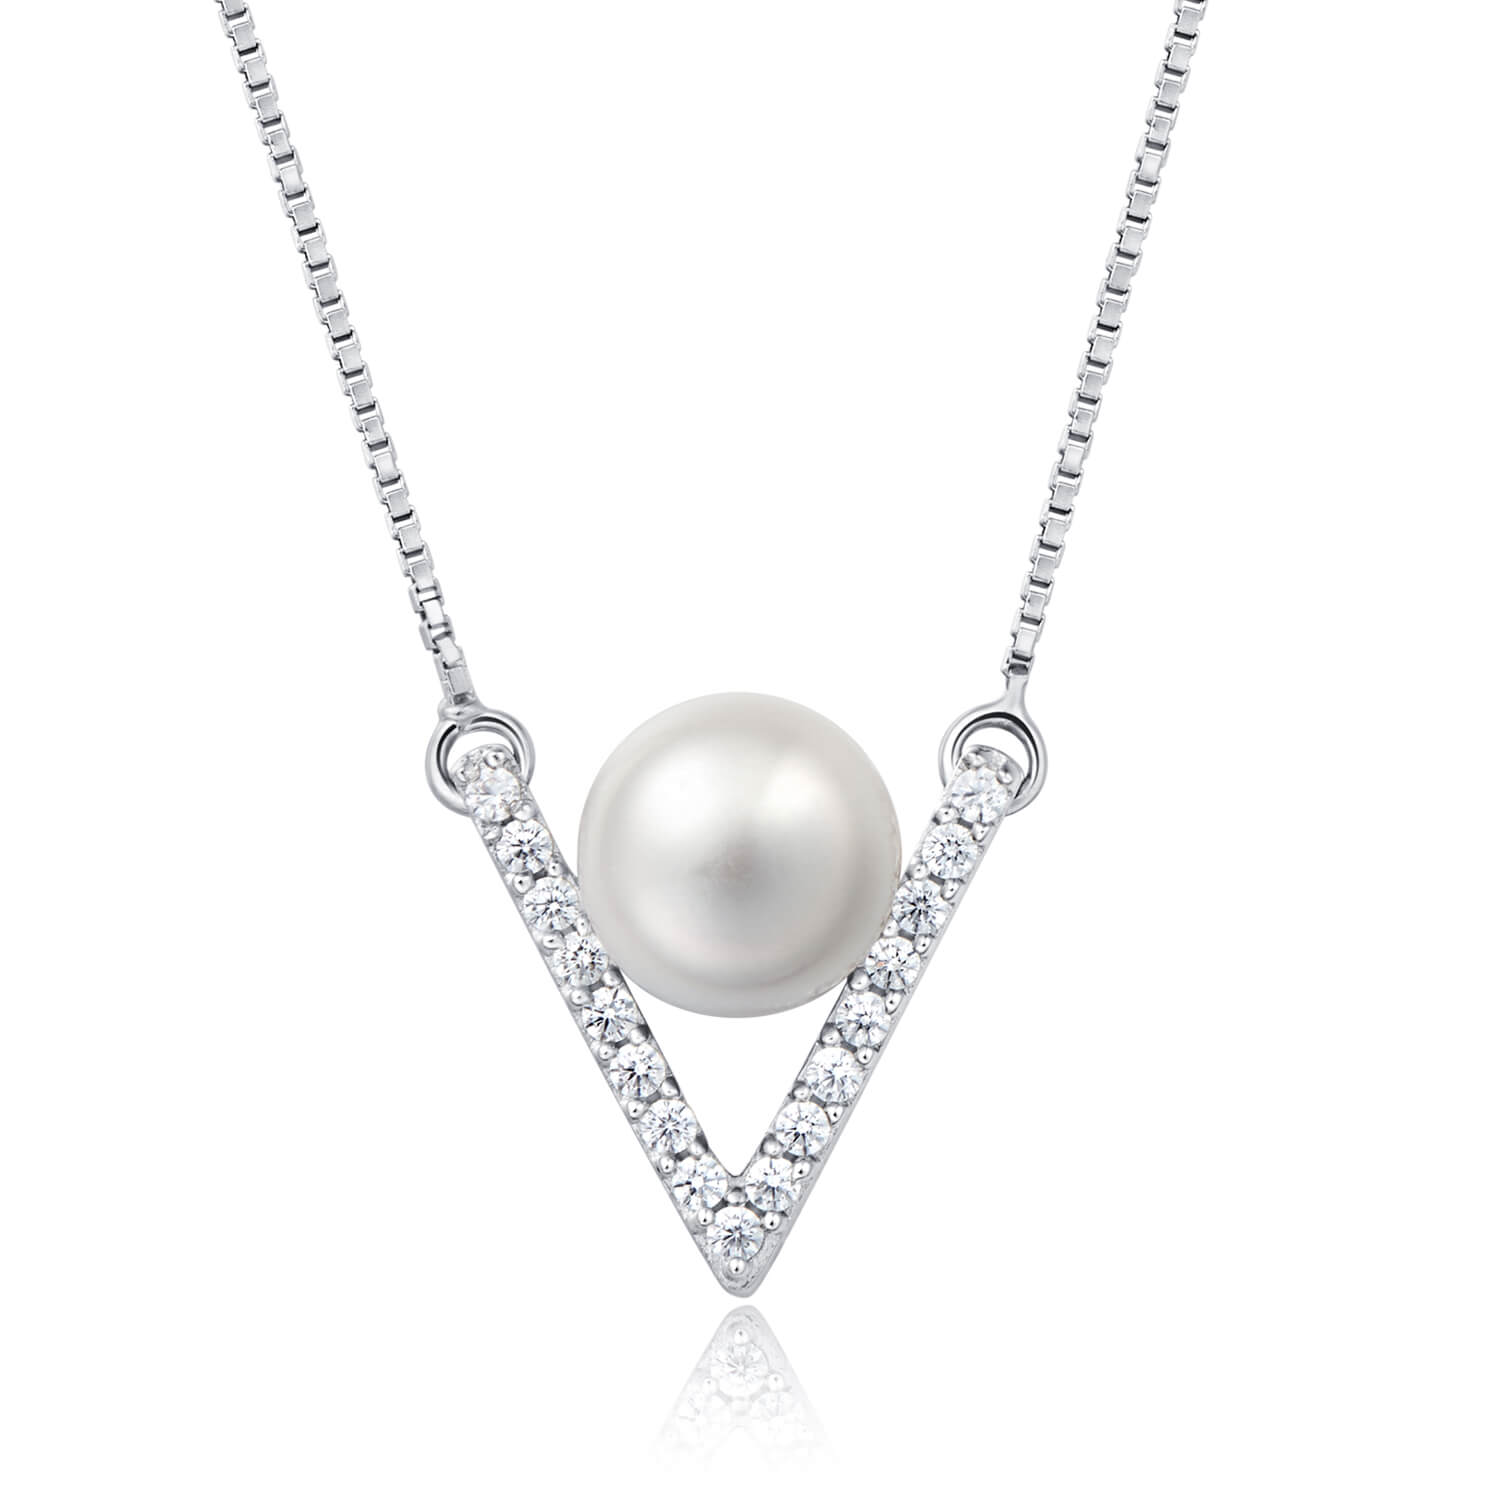 Molah 925 Silver Cultured Freshwater Pearl and Cubic Zirconia Chevron Necklace